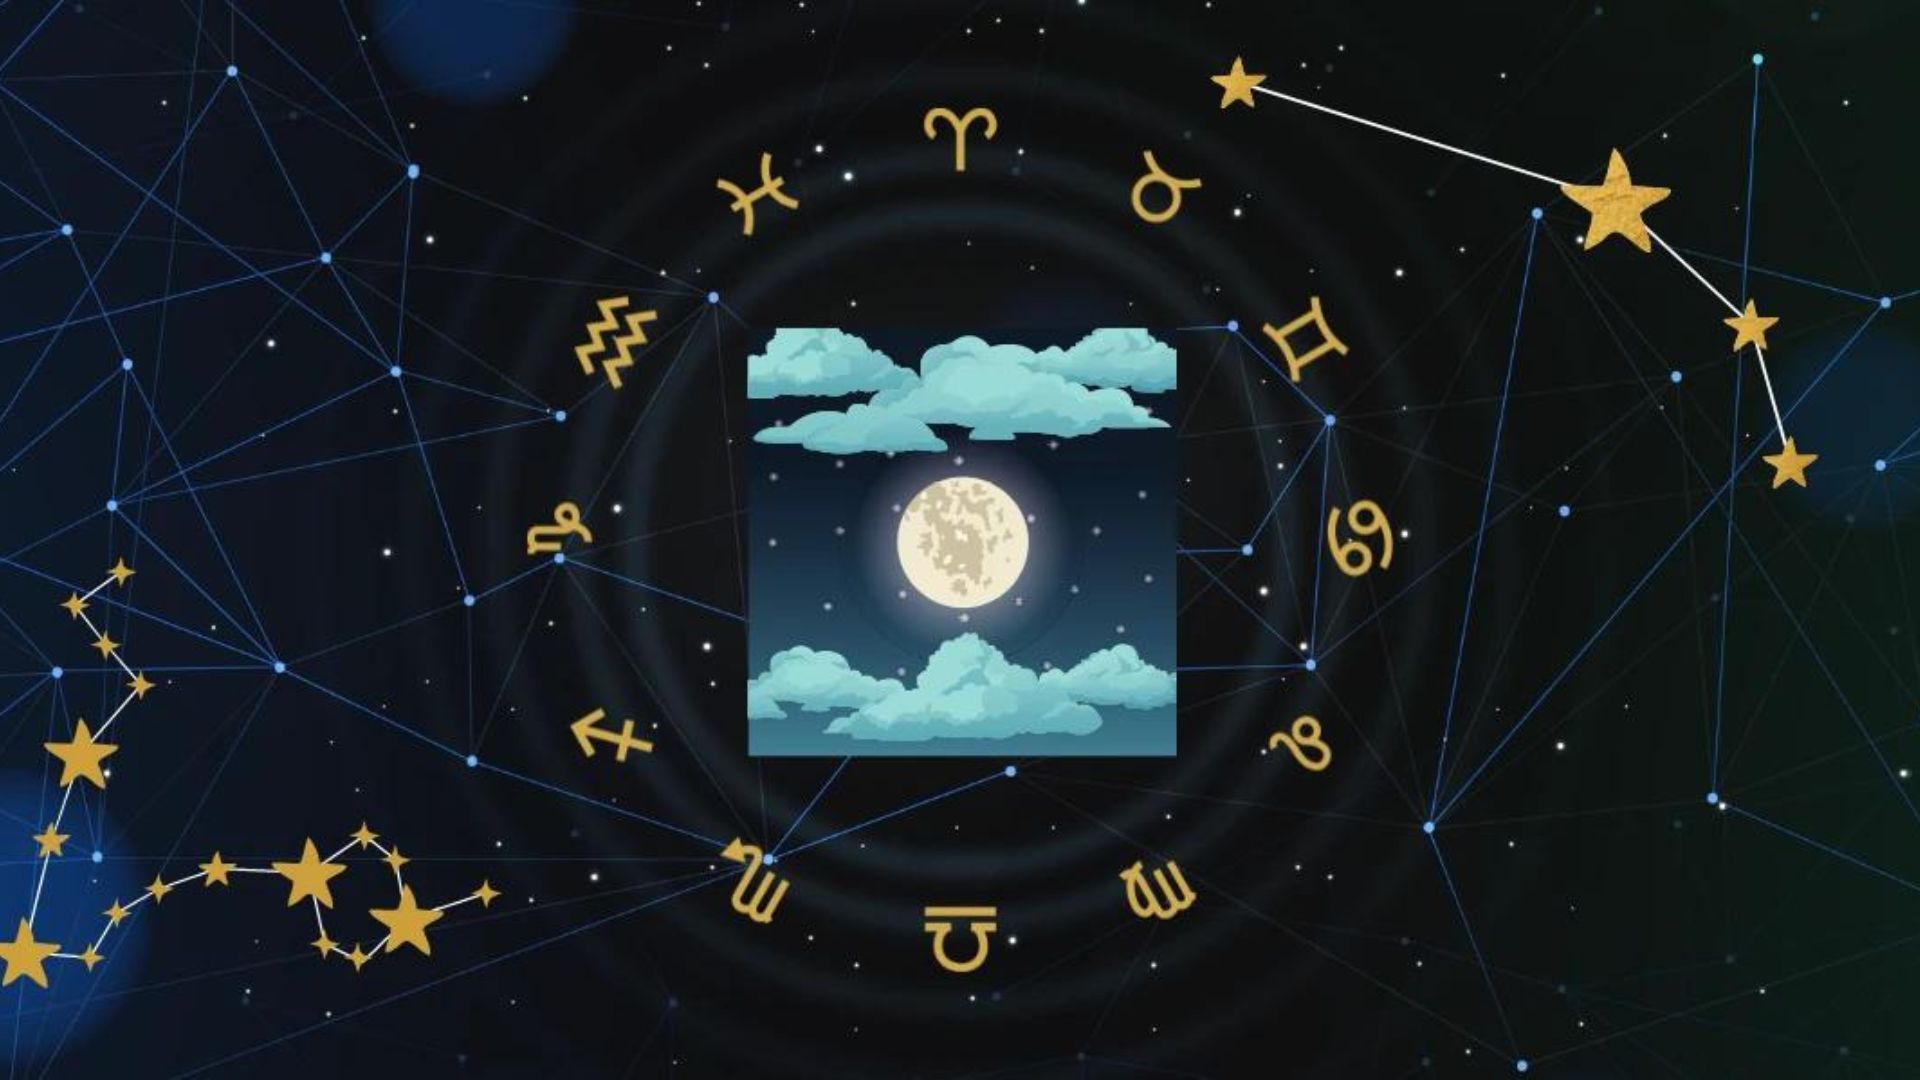 Zodiac Signs Around Moon And Clouds